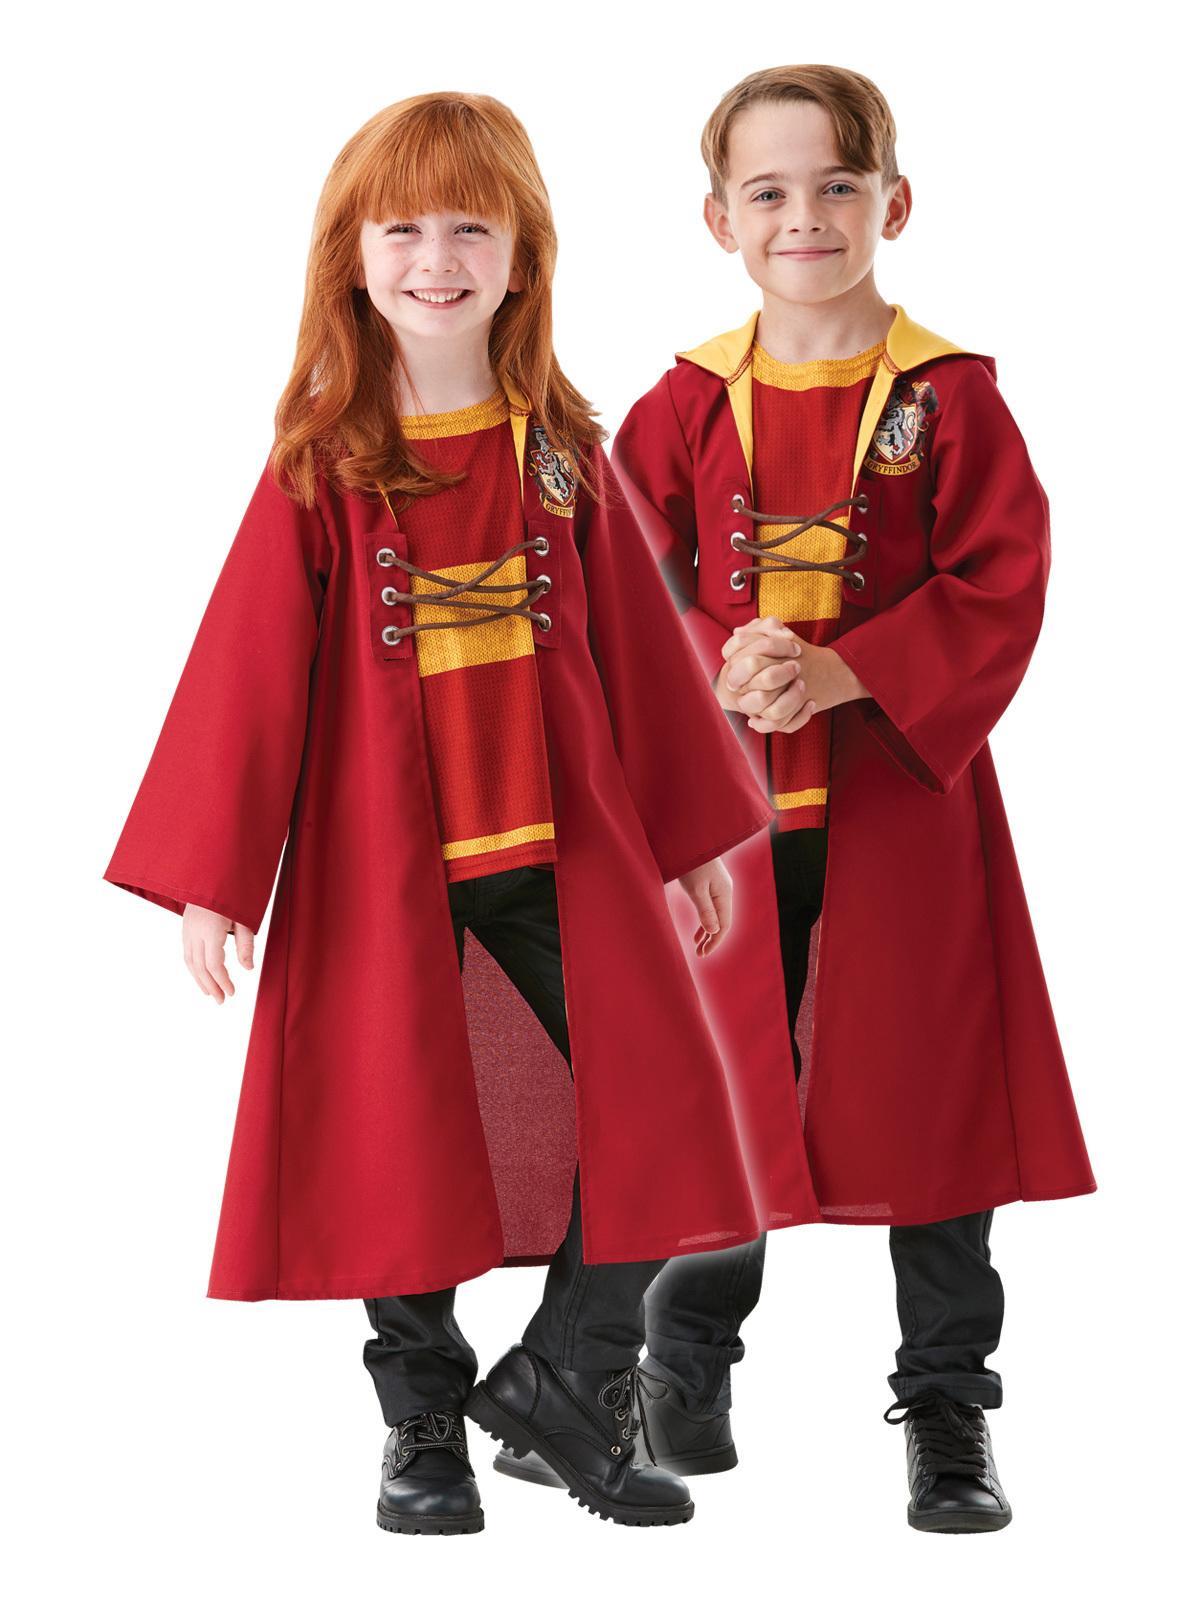 Harry Potter Quidditch Hooded Robe Dress Up Halloween Party Costume